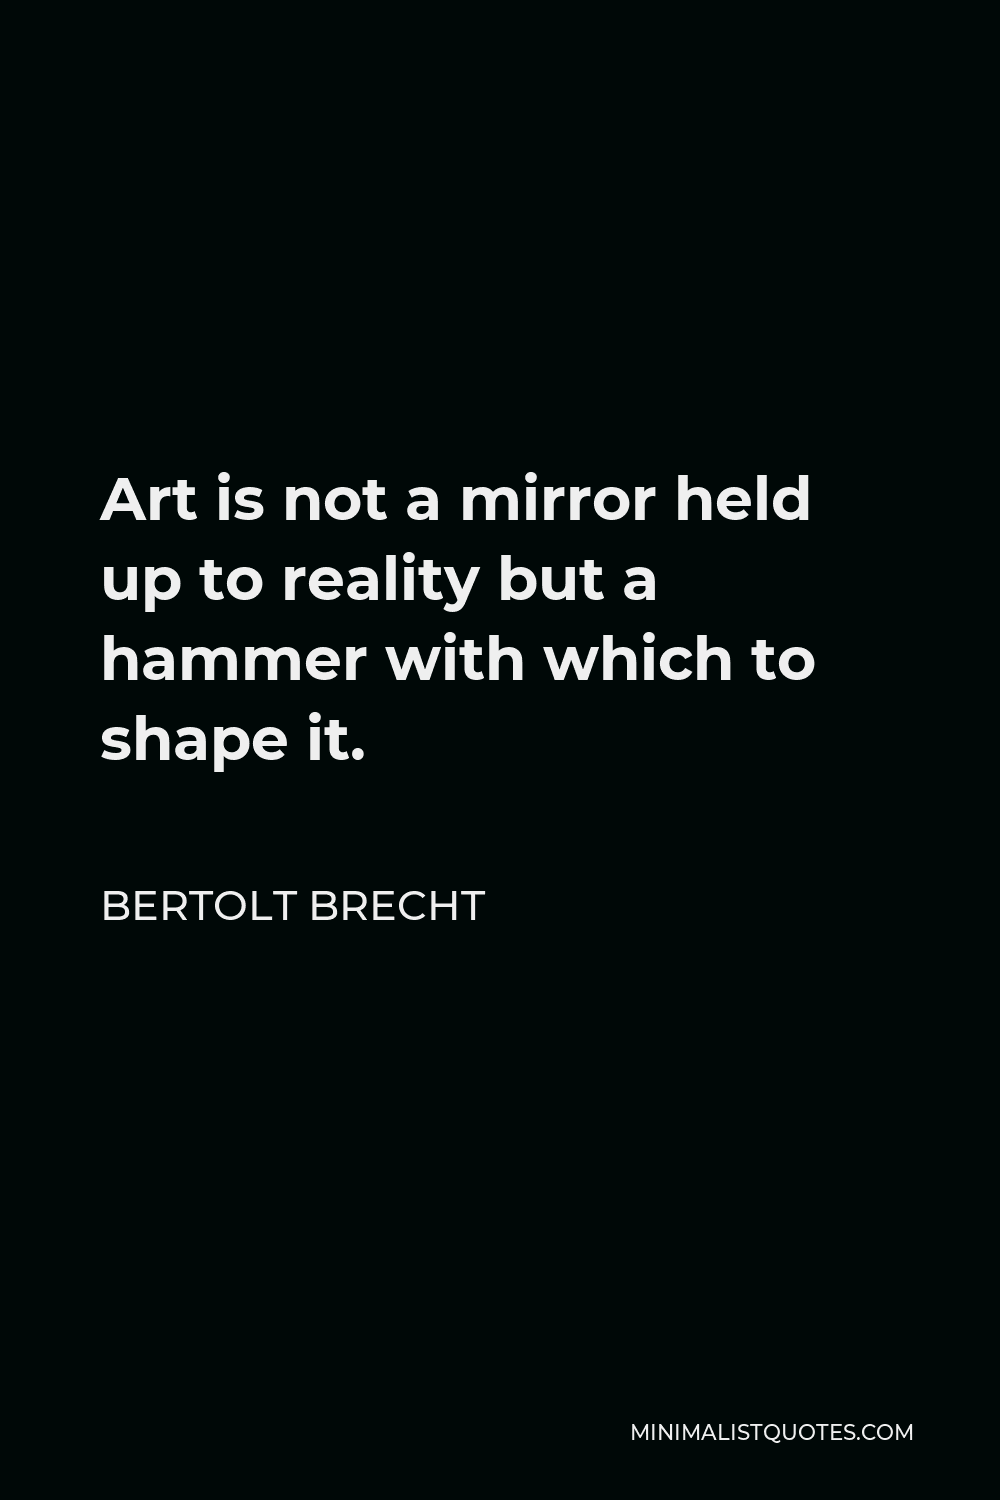 Bertolt Brecht Quote - Art is not a mirror held up to reality but a hammer with which to shape it.